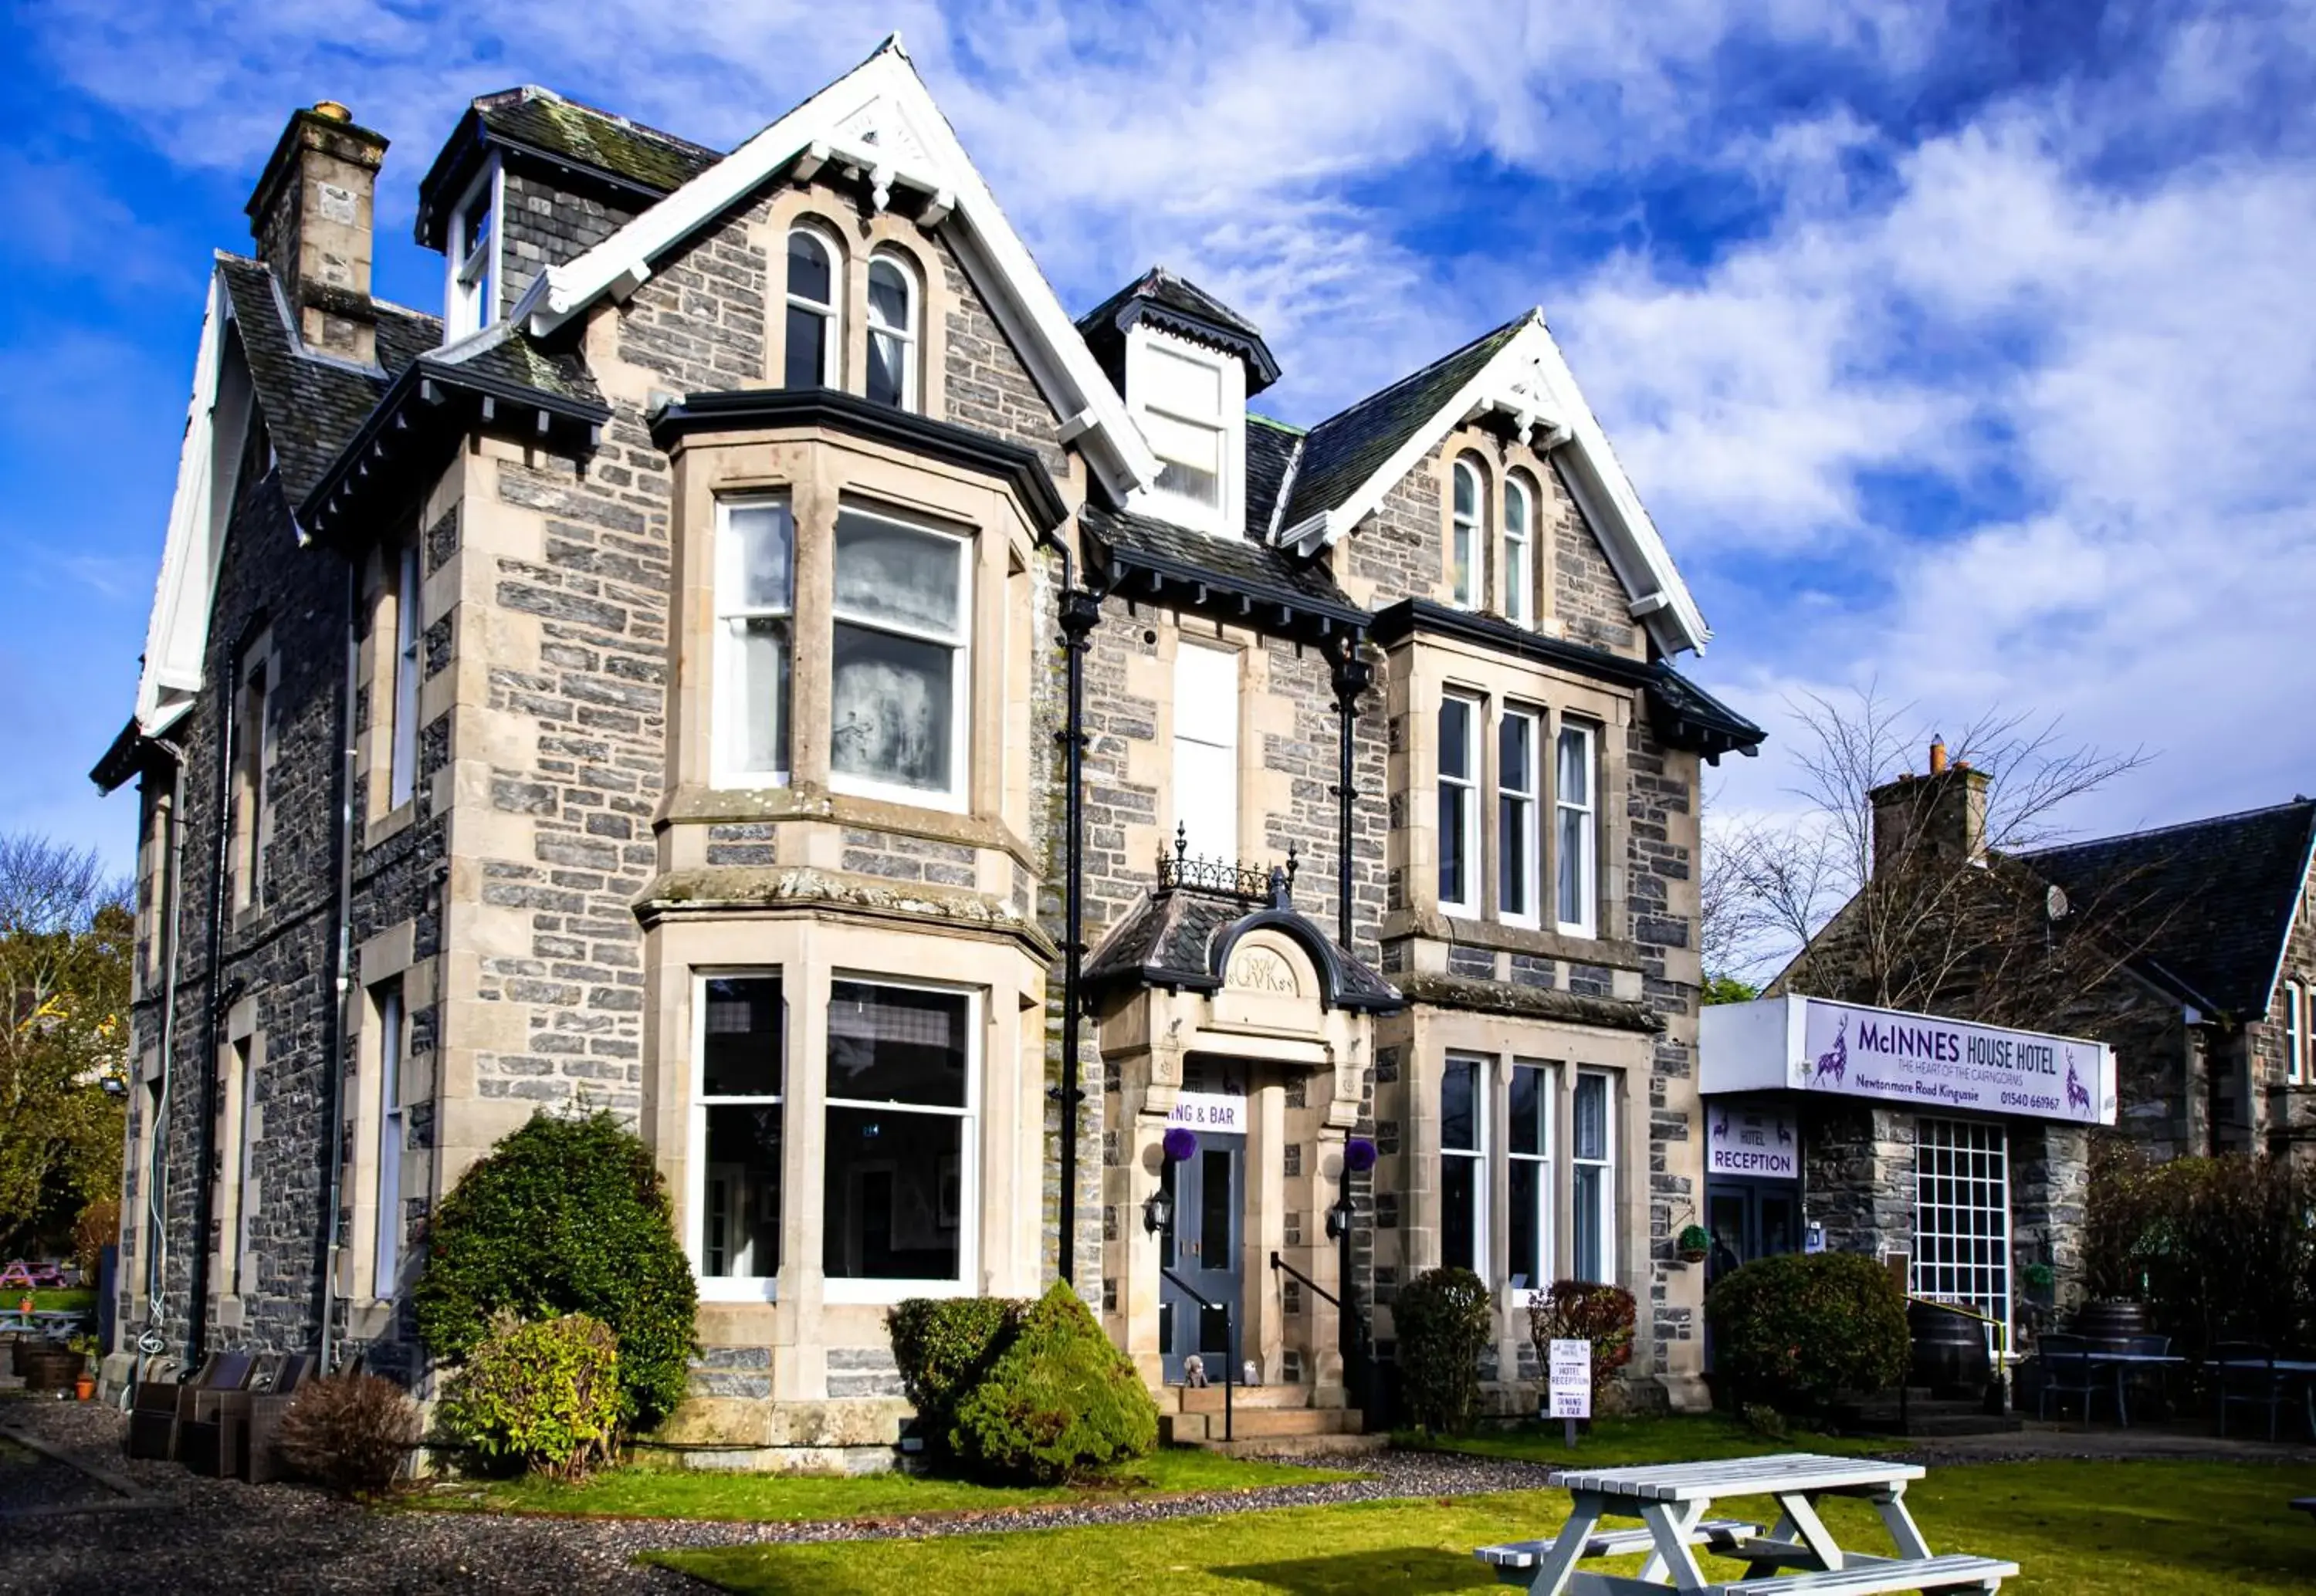 Property Building in McInnes House Hotel